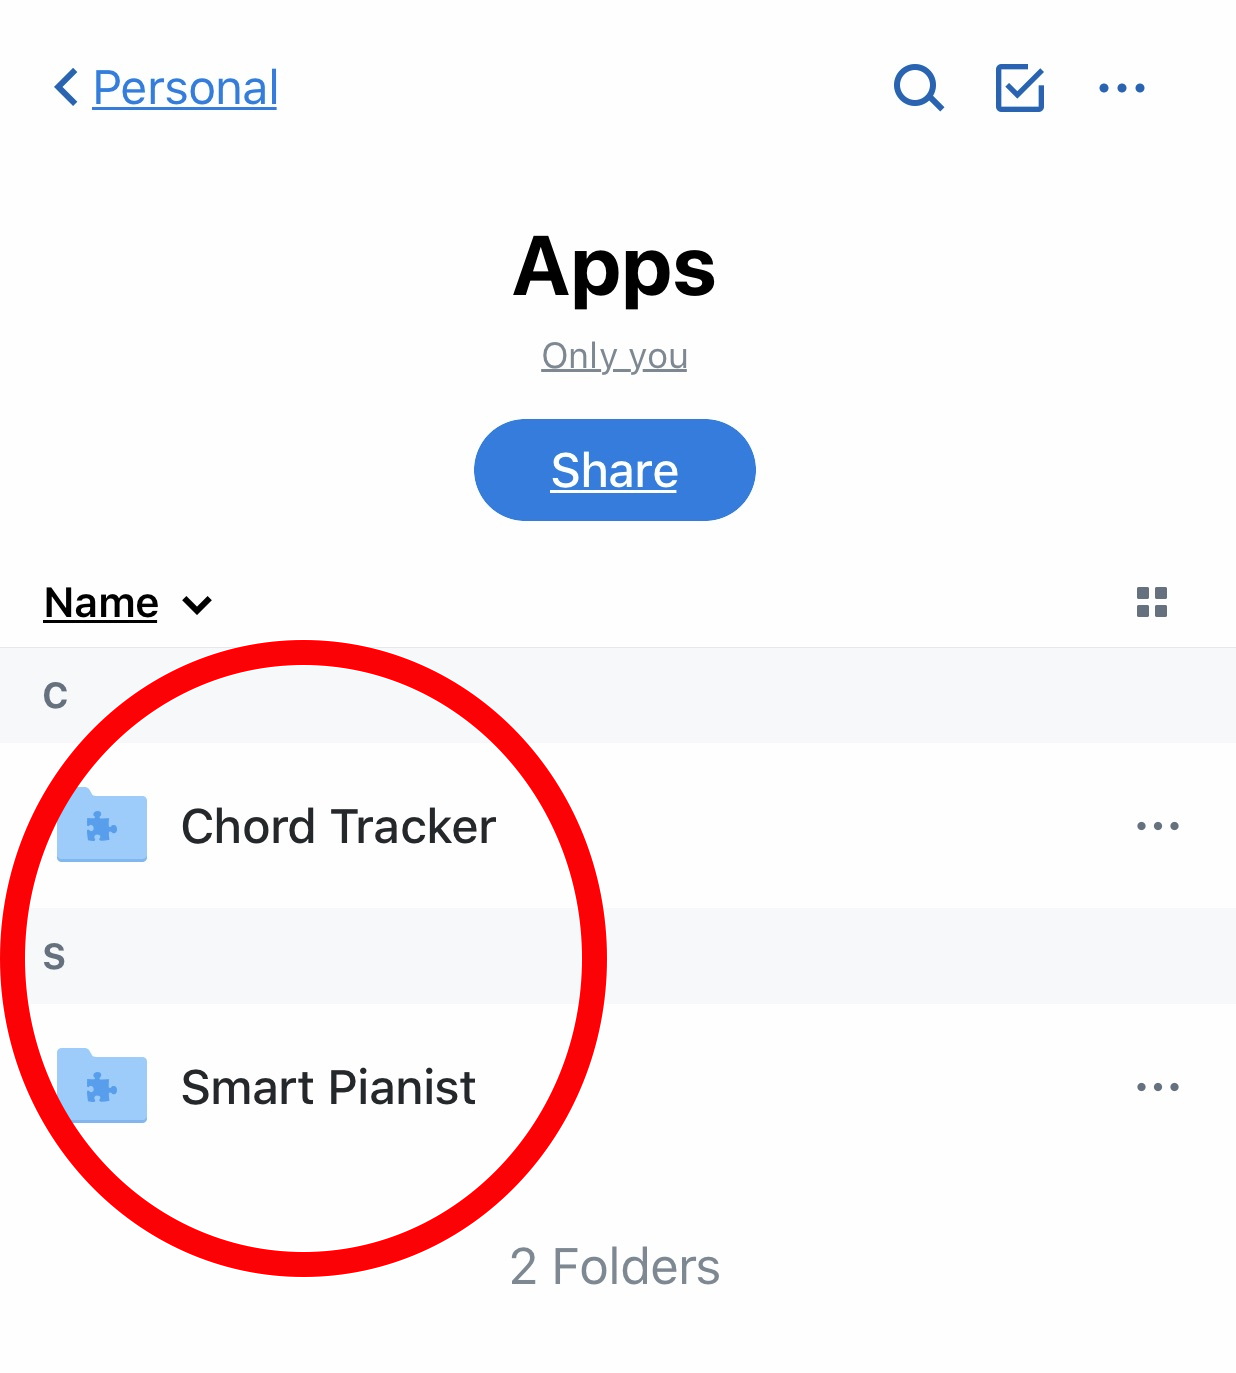 An image displaying the Chord Tracker and Smart Pianist app folders in Dropbox.